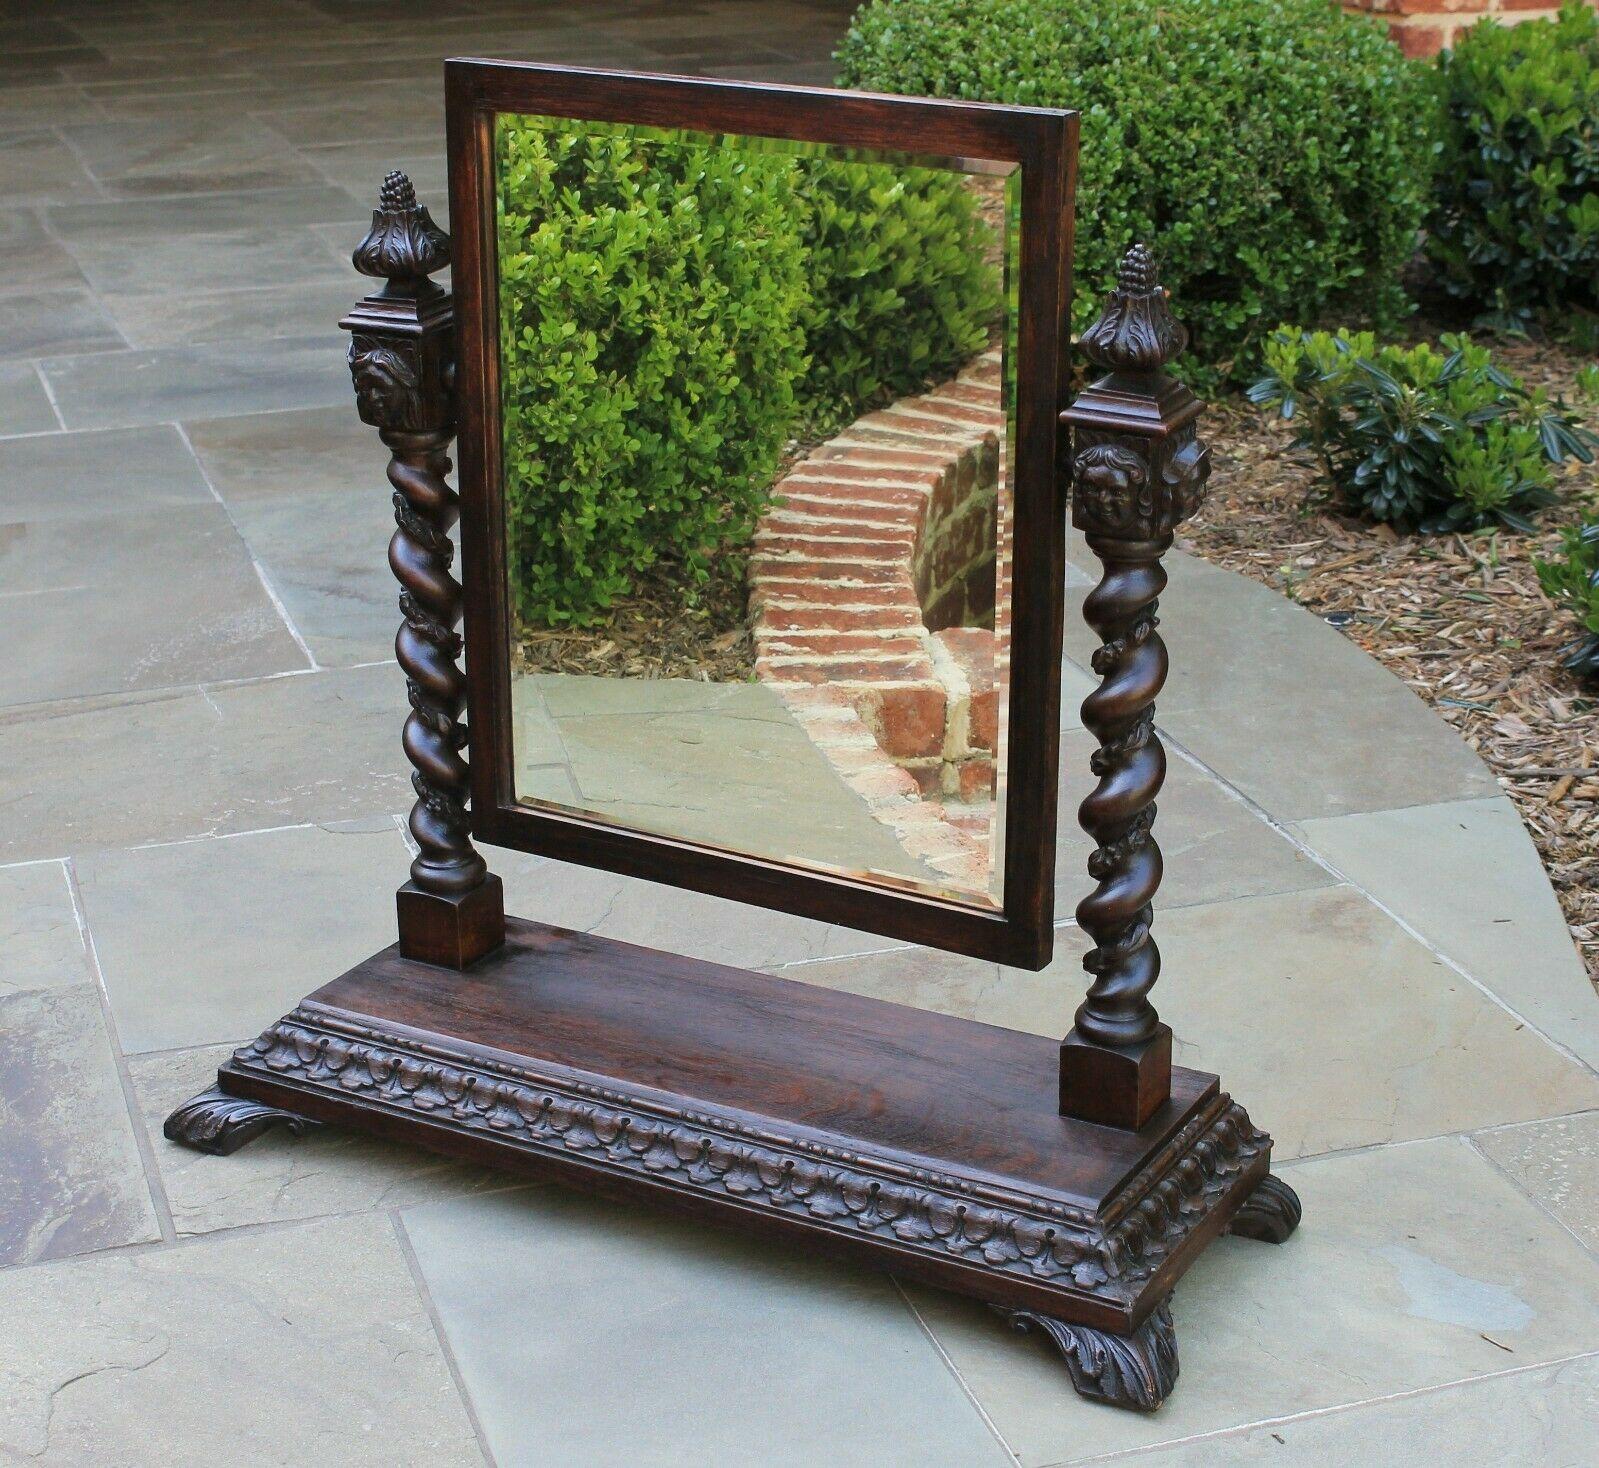 Superb antique English oak Gothic Barley twist tilting / swivel shaving, dresser or vanity beveled mirror~~c. 1880s
 
 We can't say enough wonderful things about this exquisitely carved tilting shaving or tabletop vanity mirror~~full of 19th